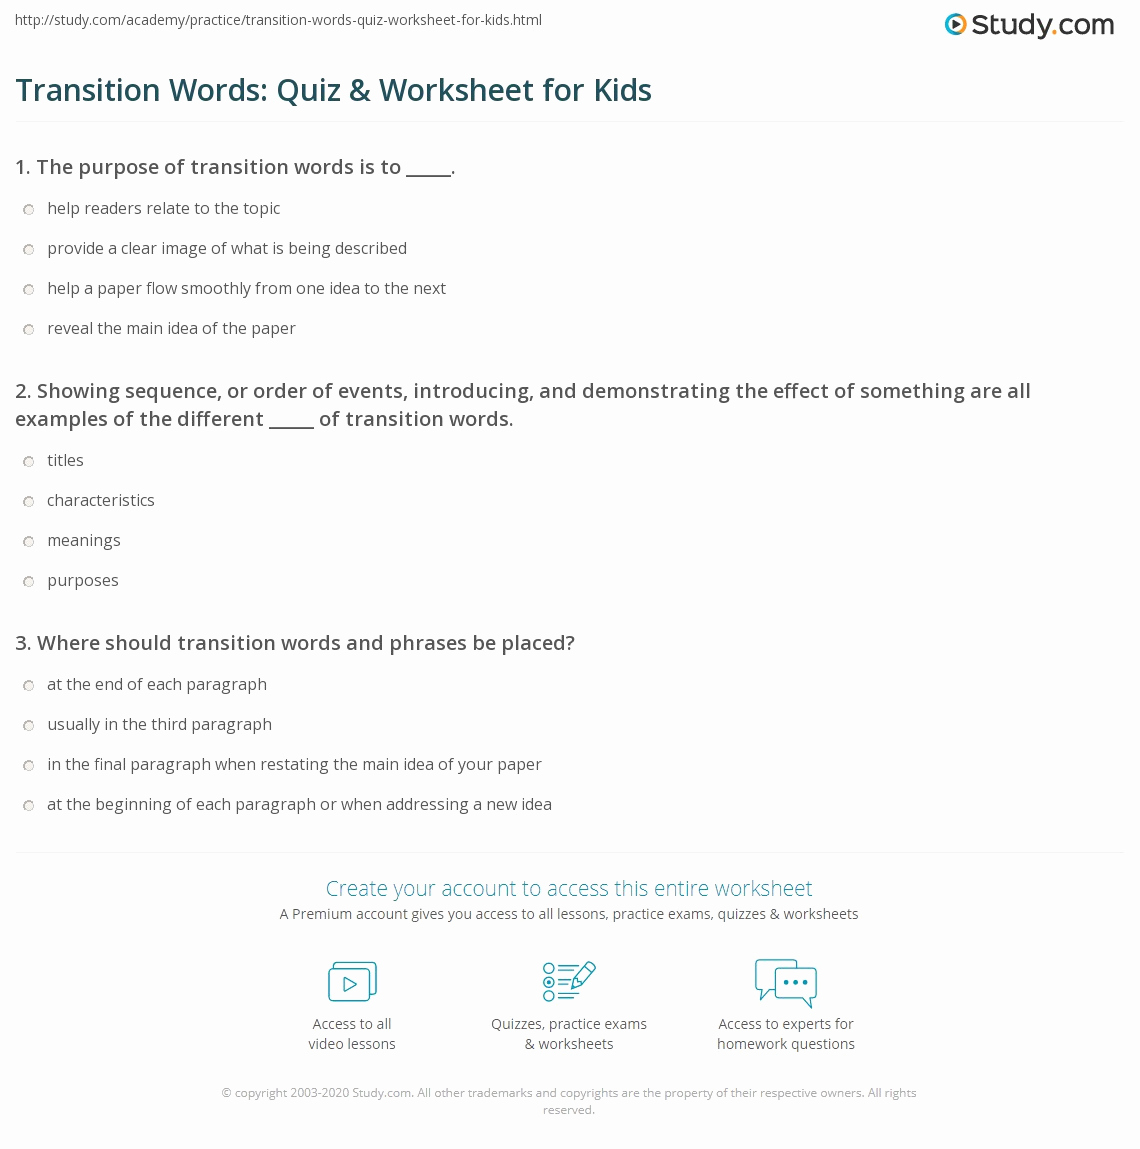 Transition Words Practice Worksheet Beautiful Transition Phrases and English Worksheet 1